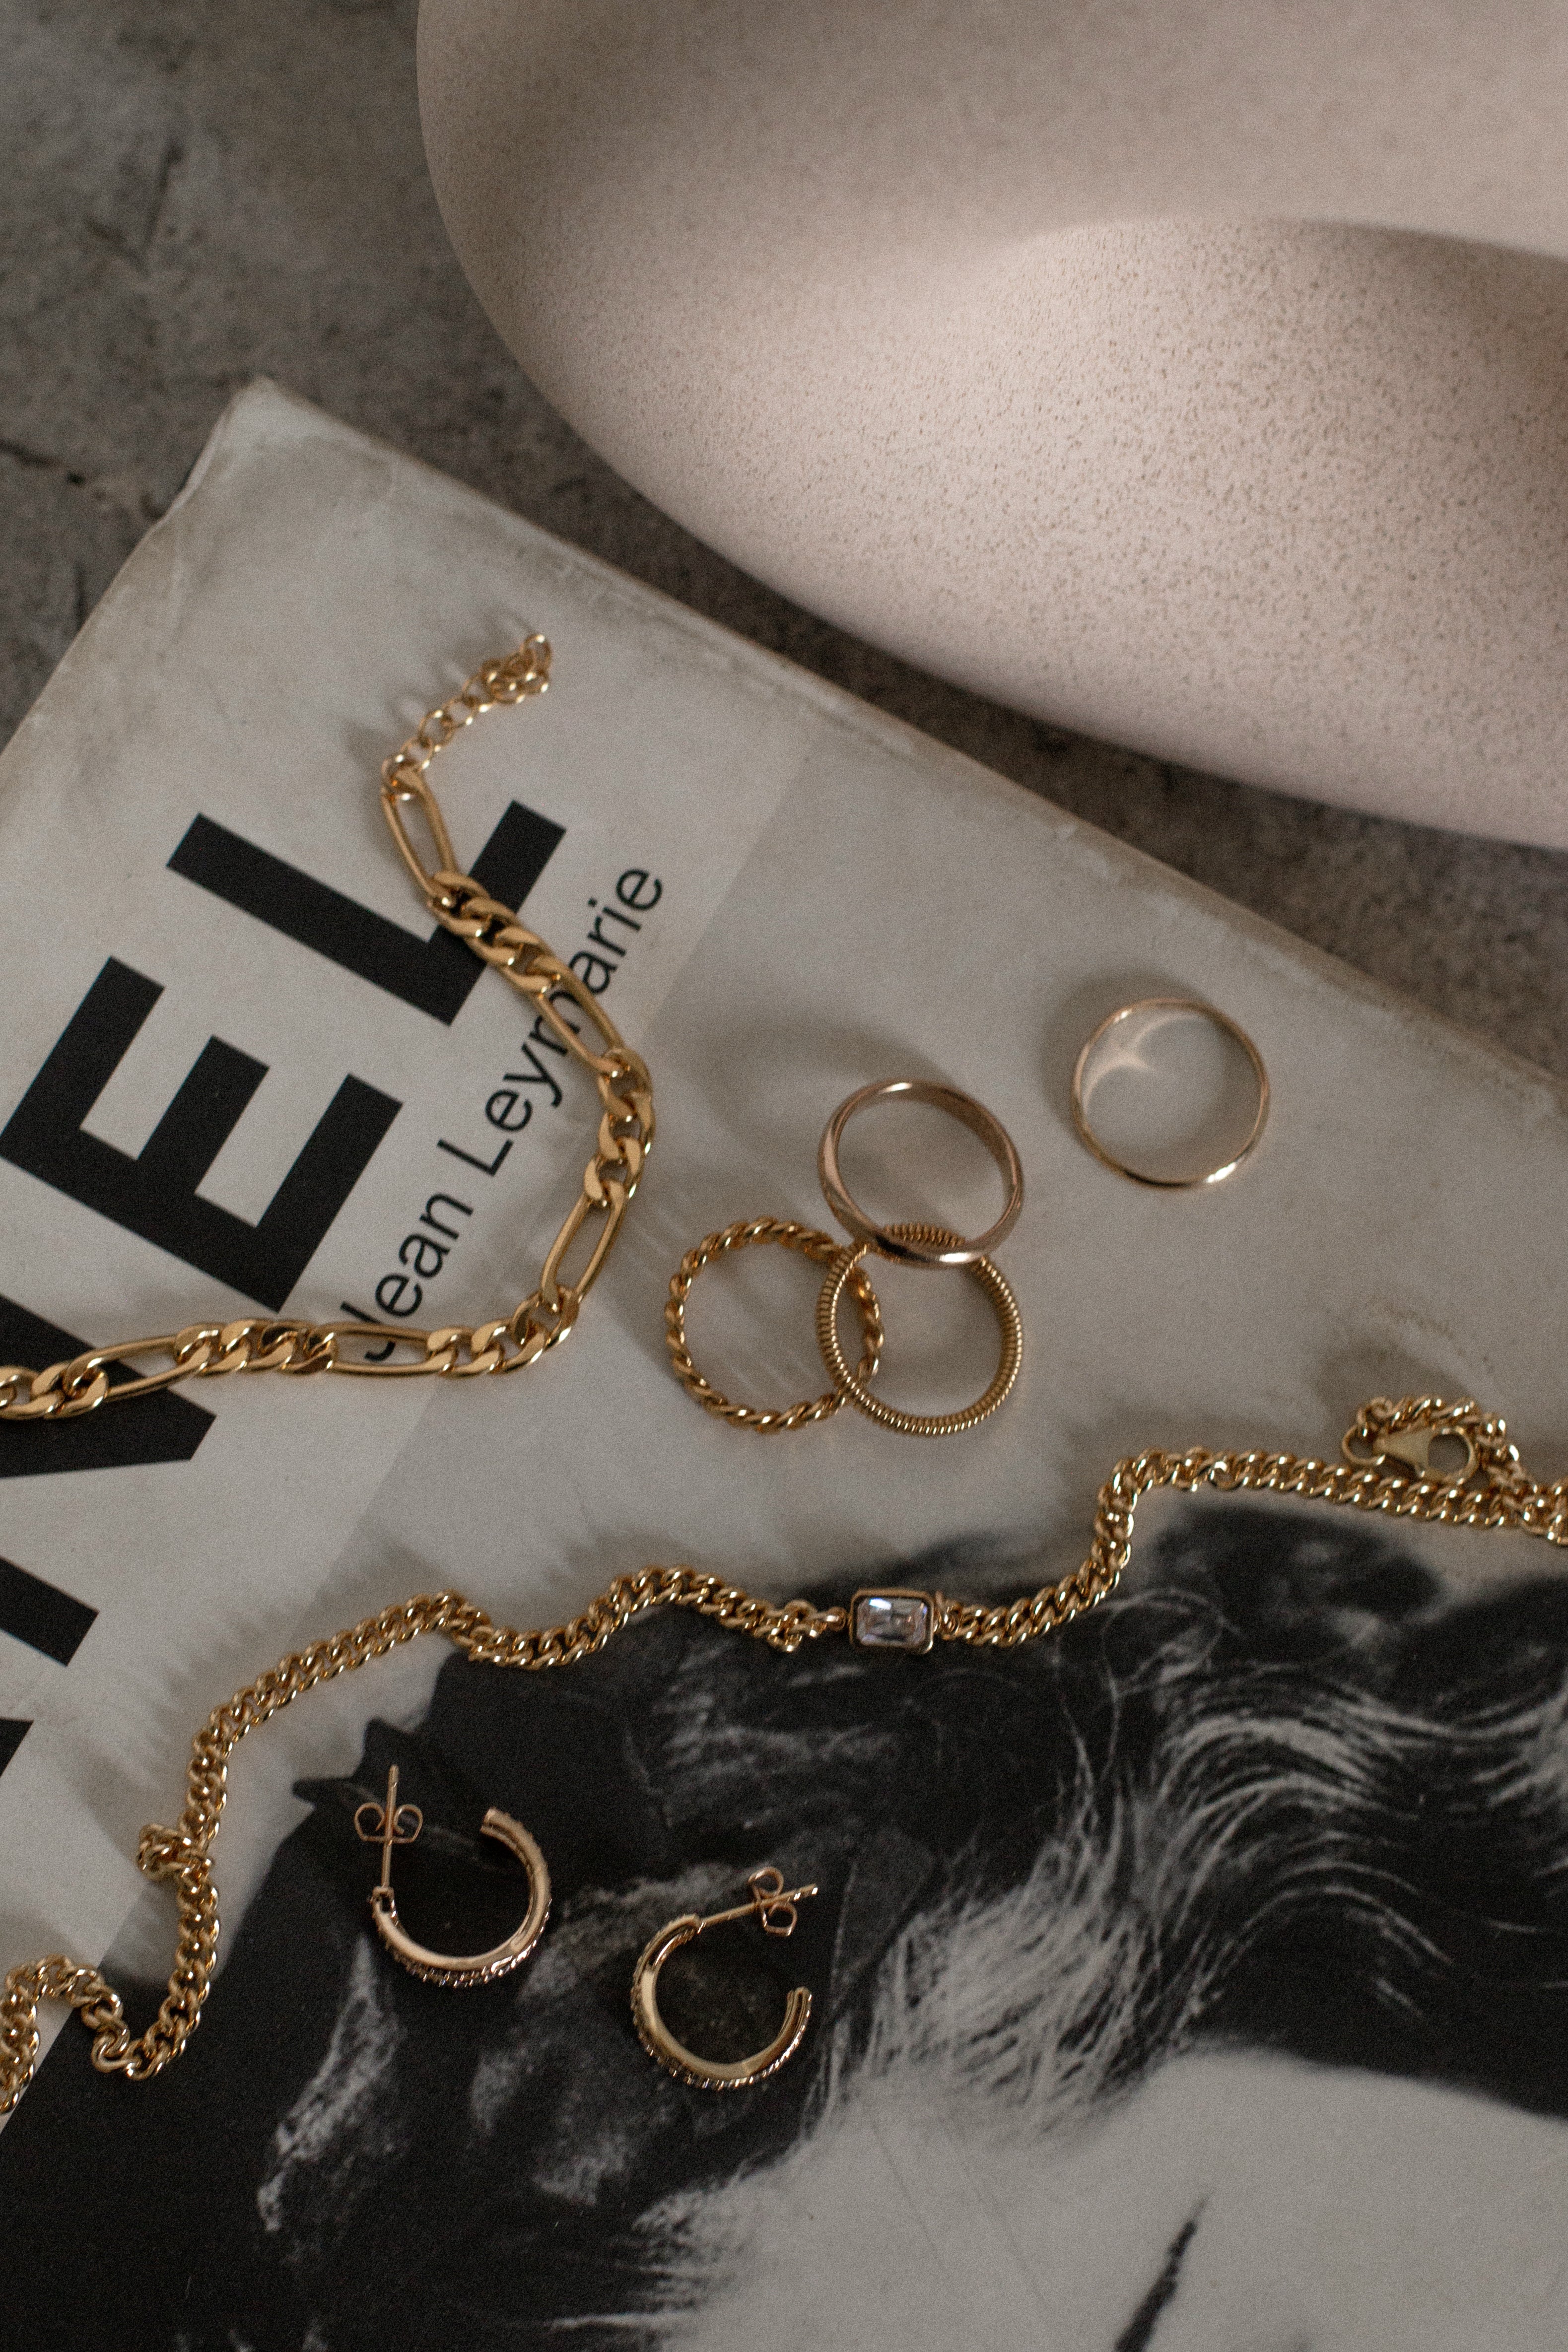 aesthetic magazine chanel with dainty gold filled jewelry and gold filled rings